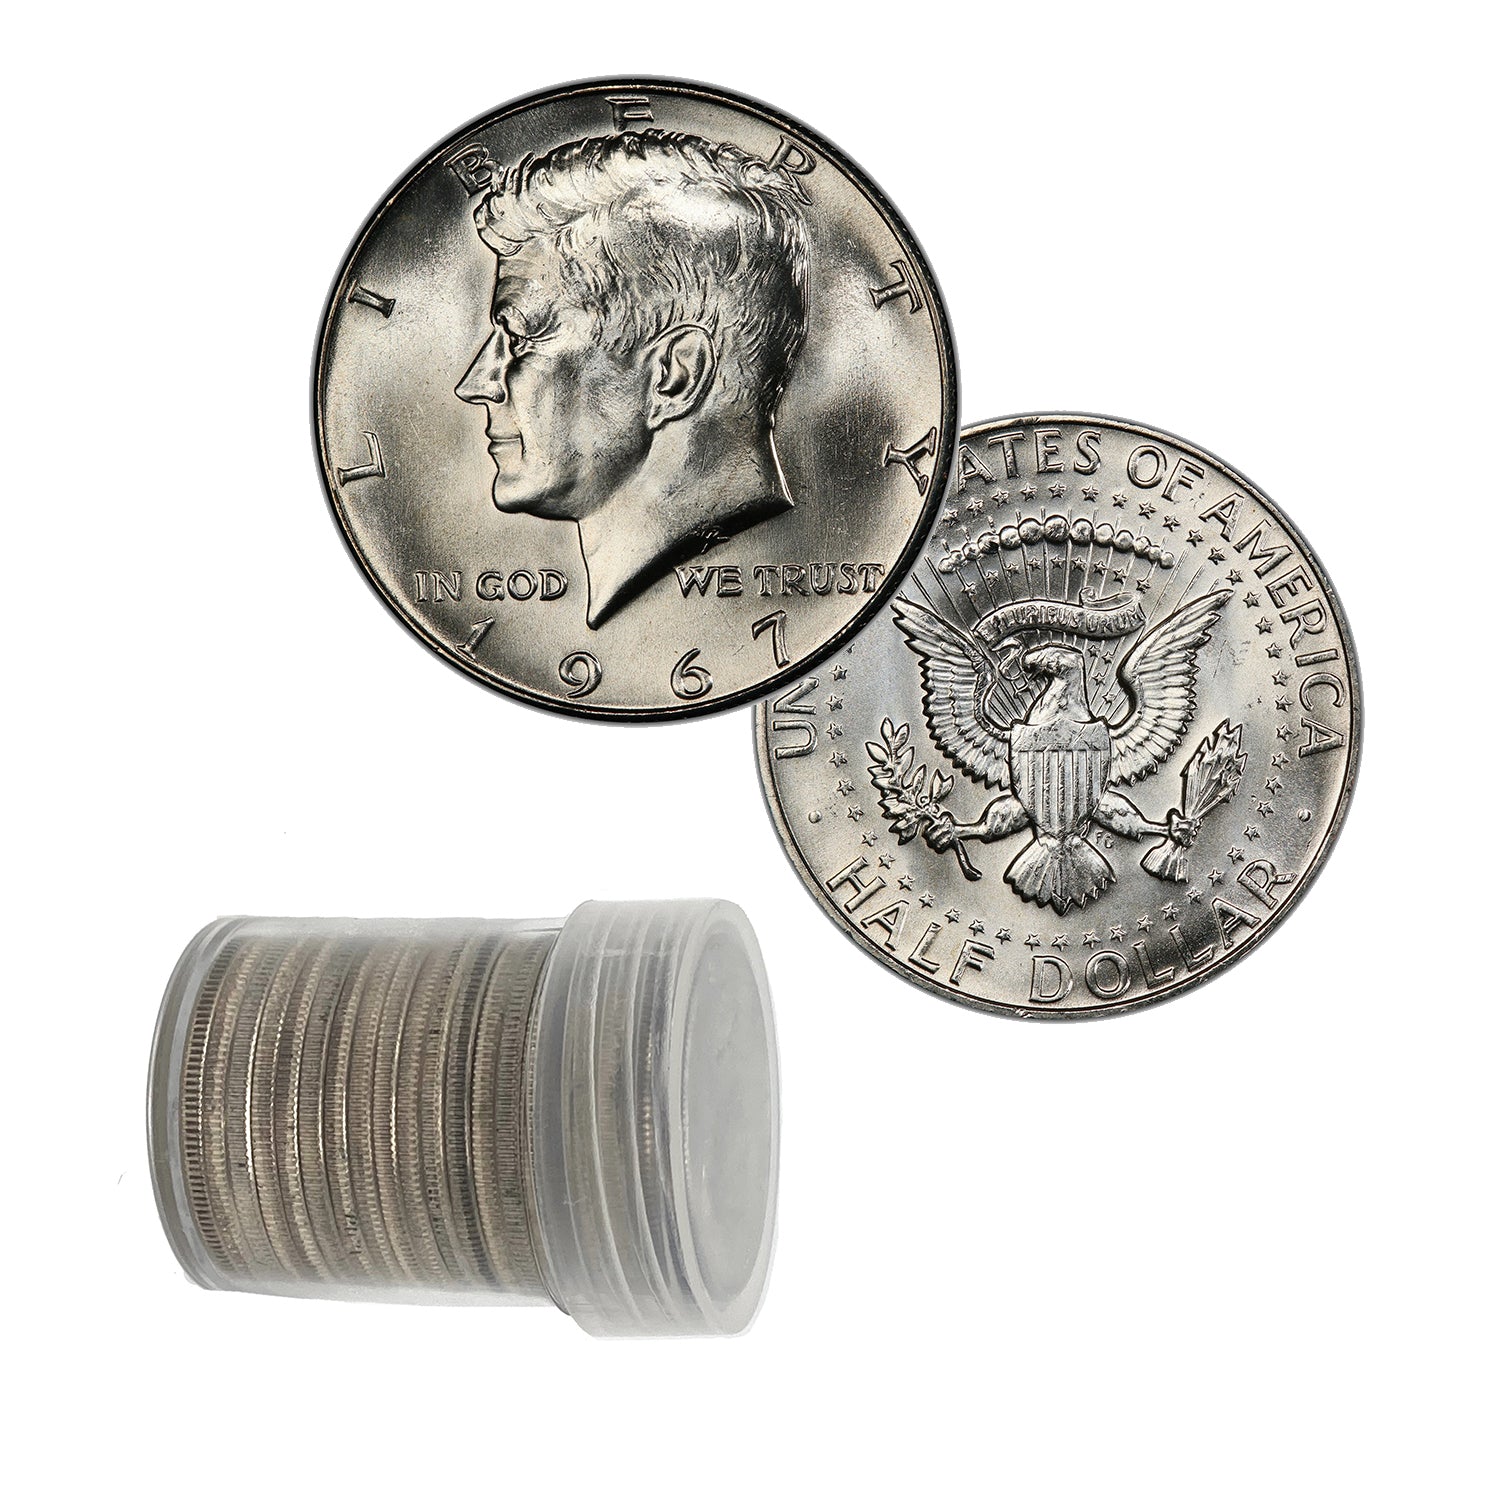 1967-P Kennedy Half Dollar Roll of 20 Mint State (40% Silver)